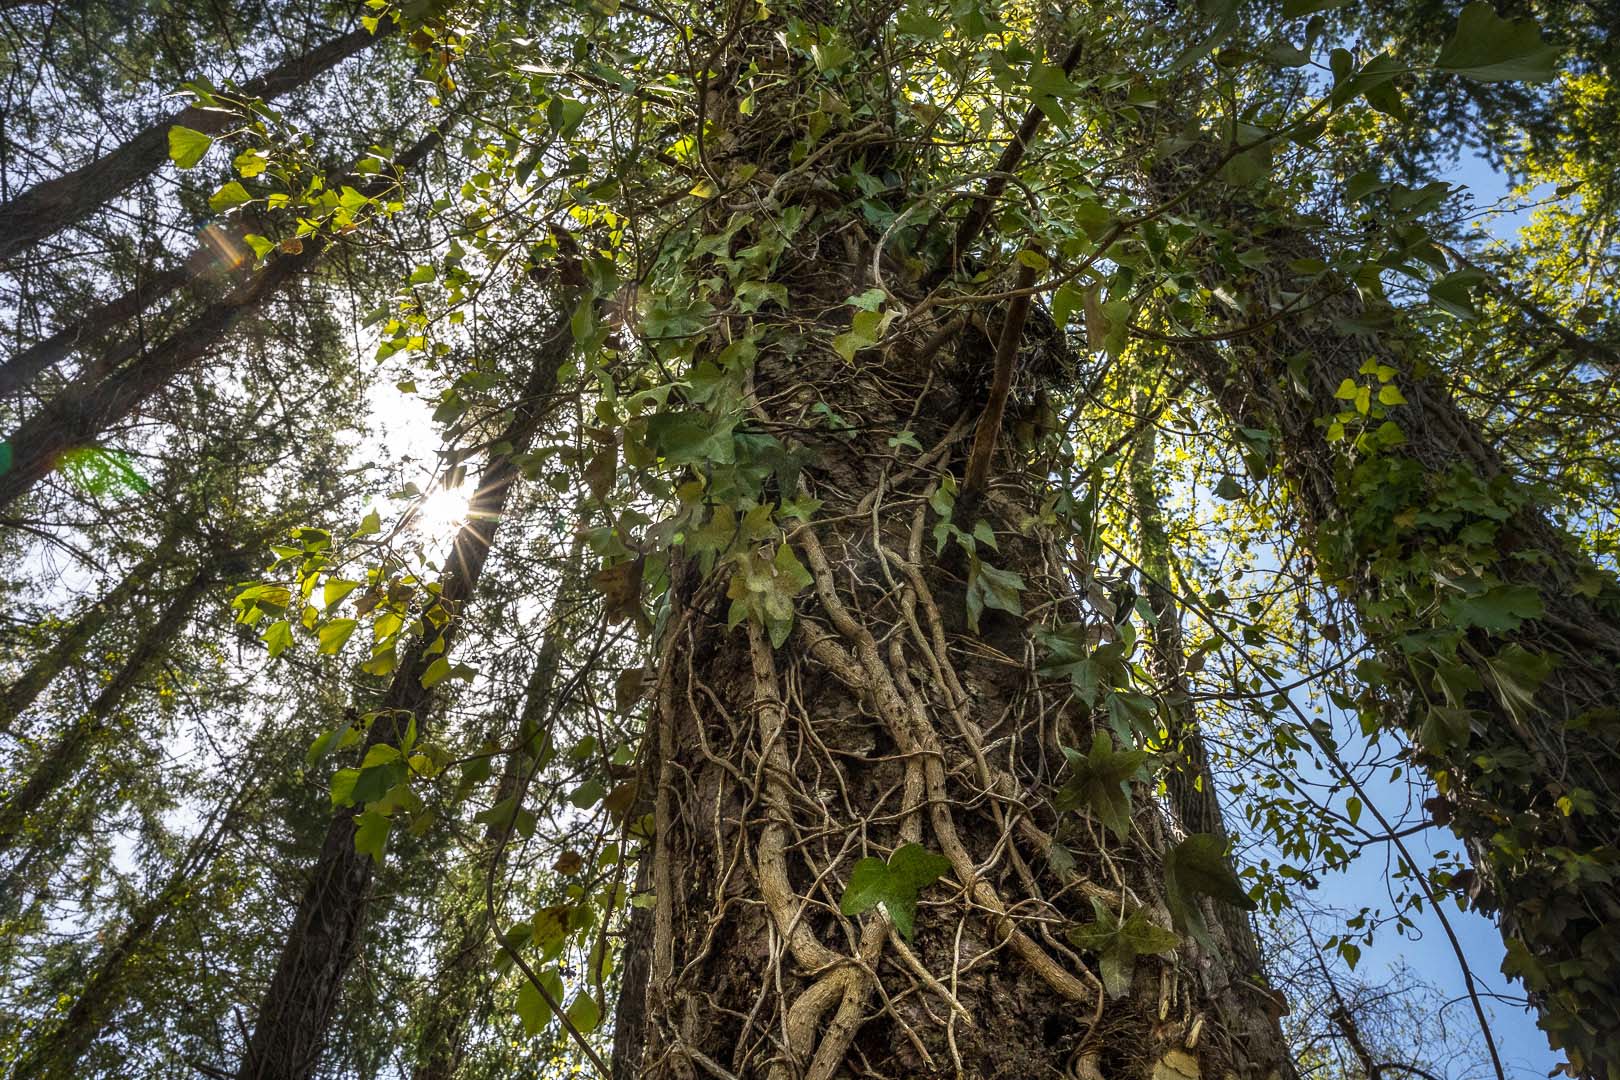 looking up at a tree trunk covered in ivy, surrounded by forest, with the sun peeking through